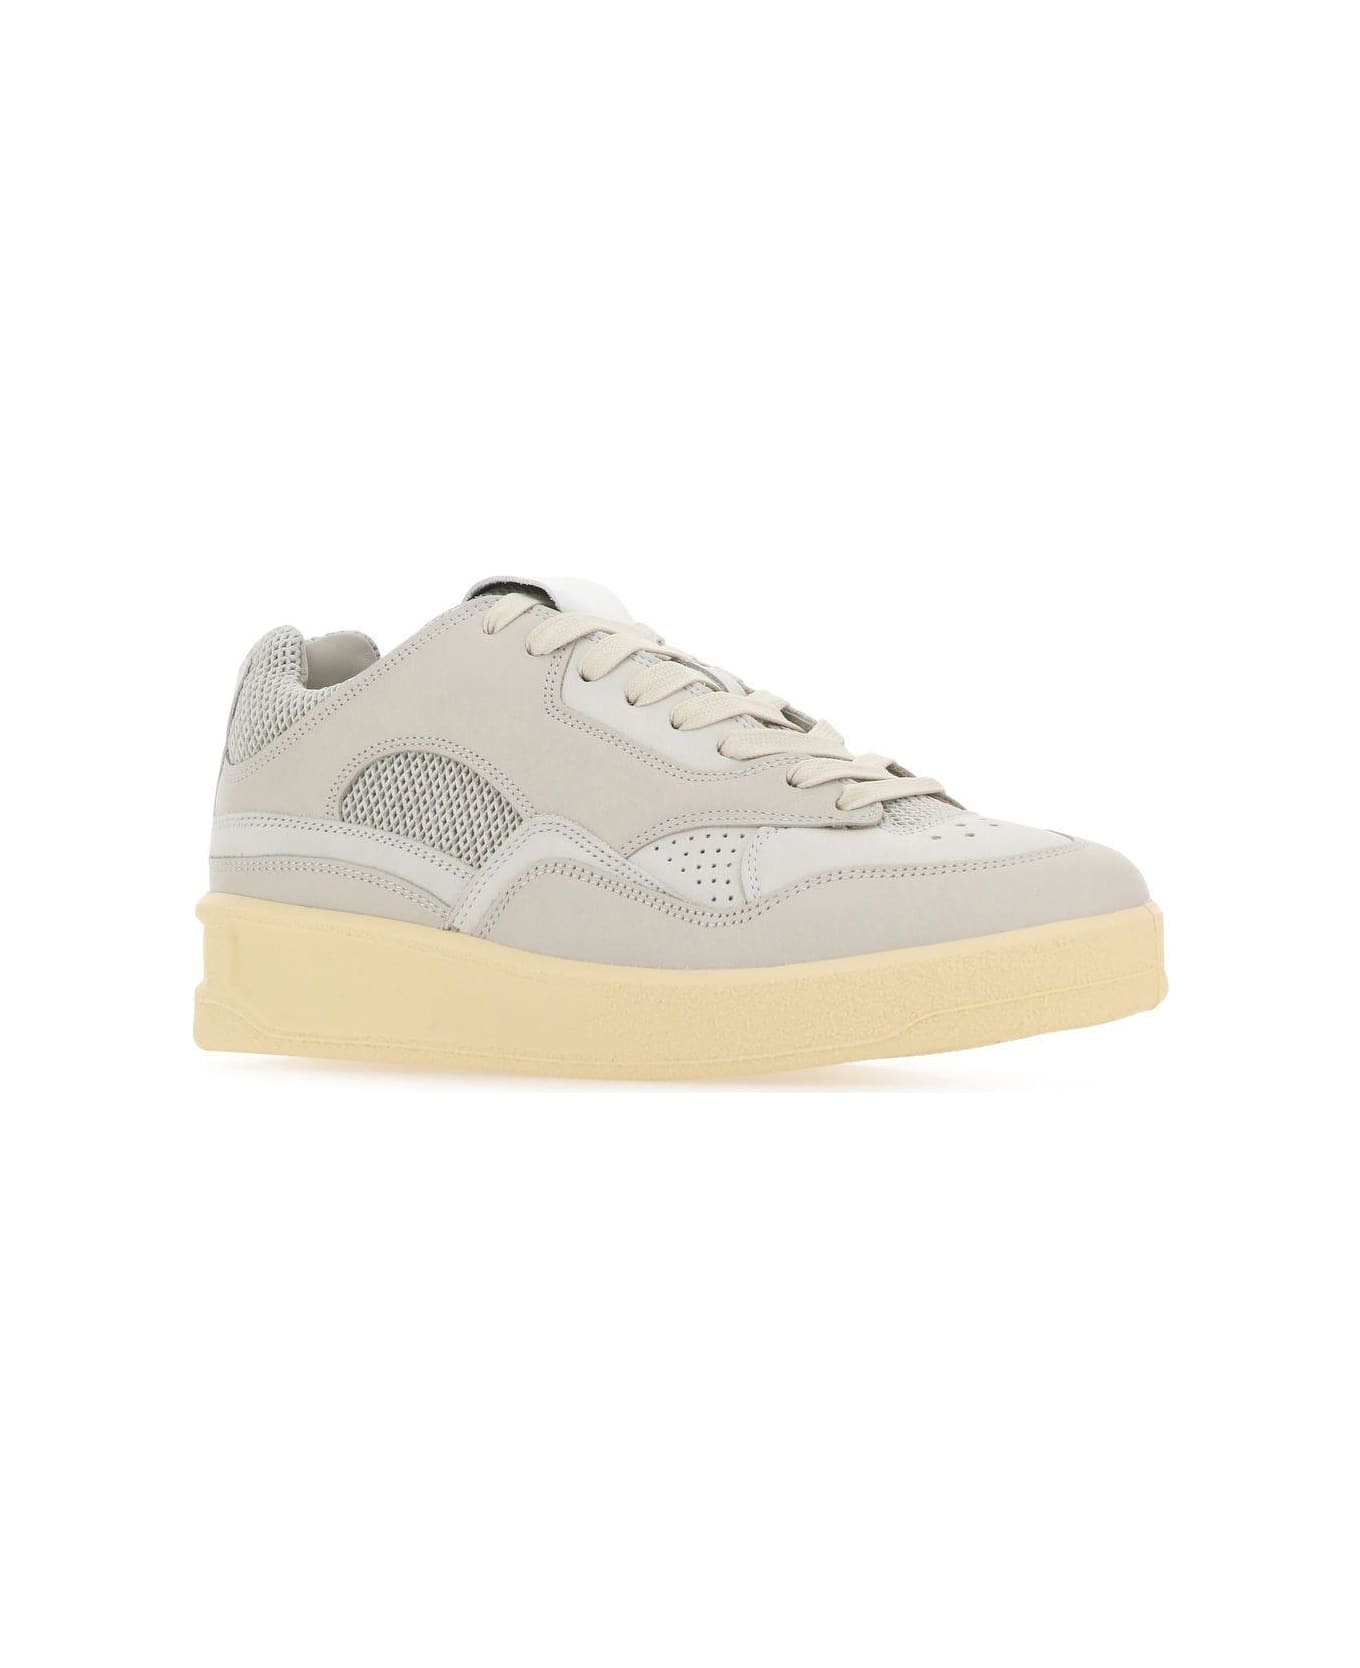 Jil Sander Grey Canvas And Rubber Sneakers - GREY